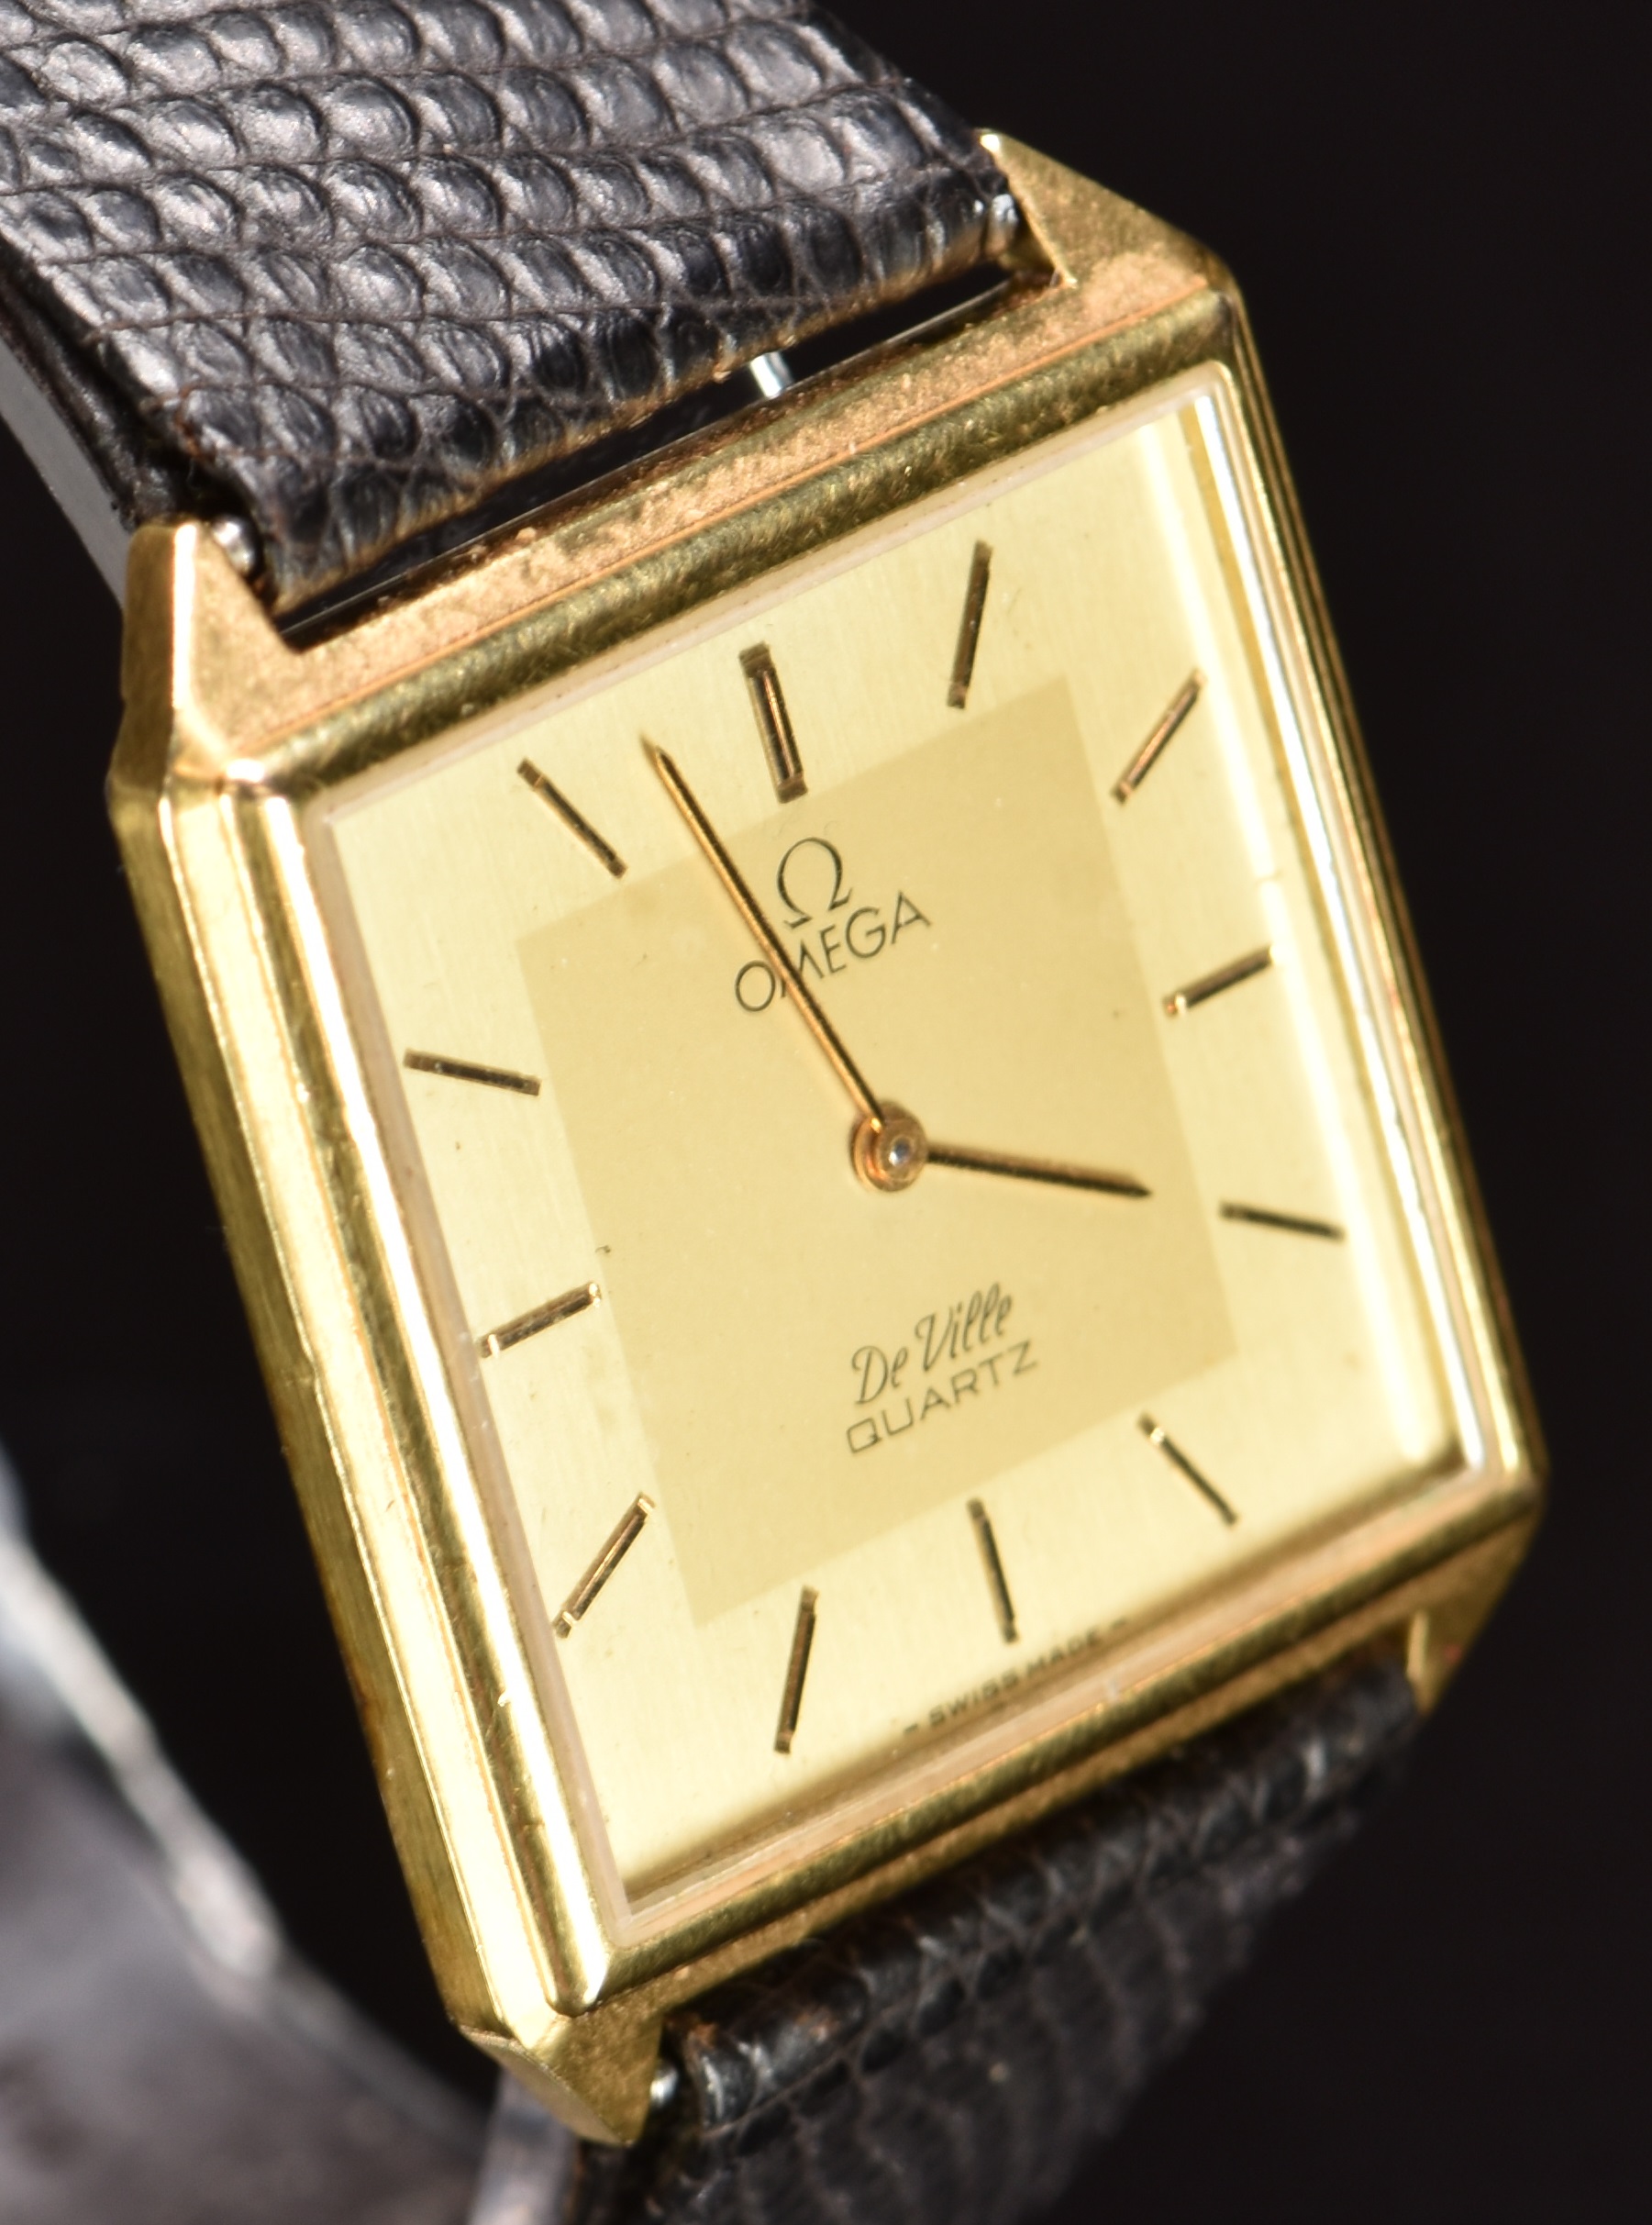 Omega De Ville gentleman's wristwatch ref. 191.0075 with black hands and baton hour markers, two- - Image 3 of 5